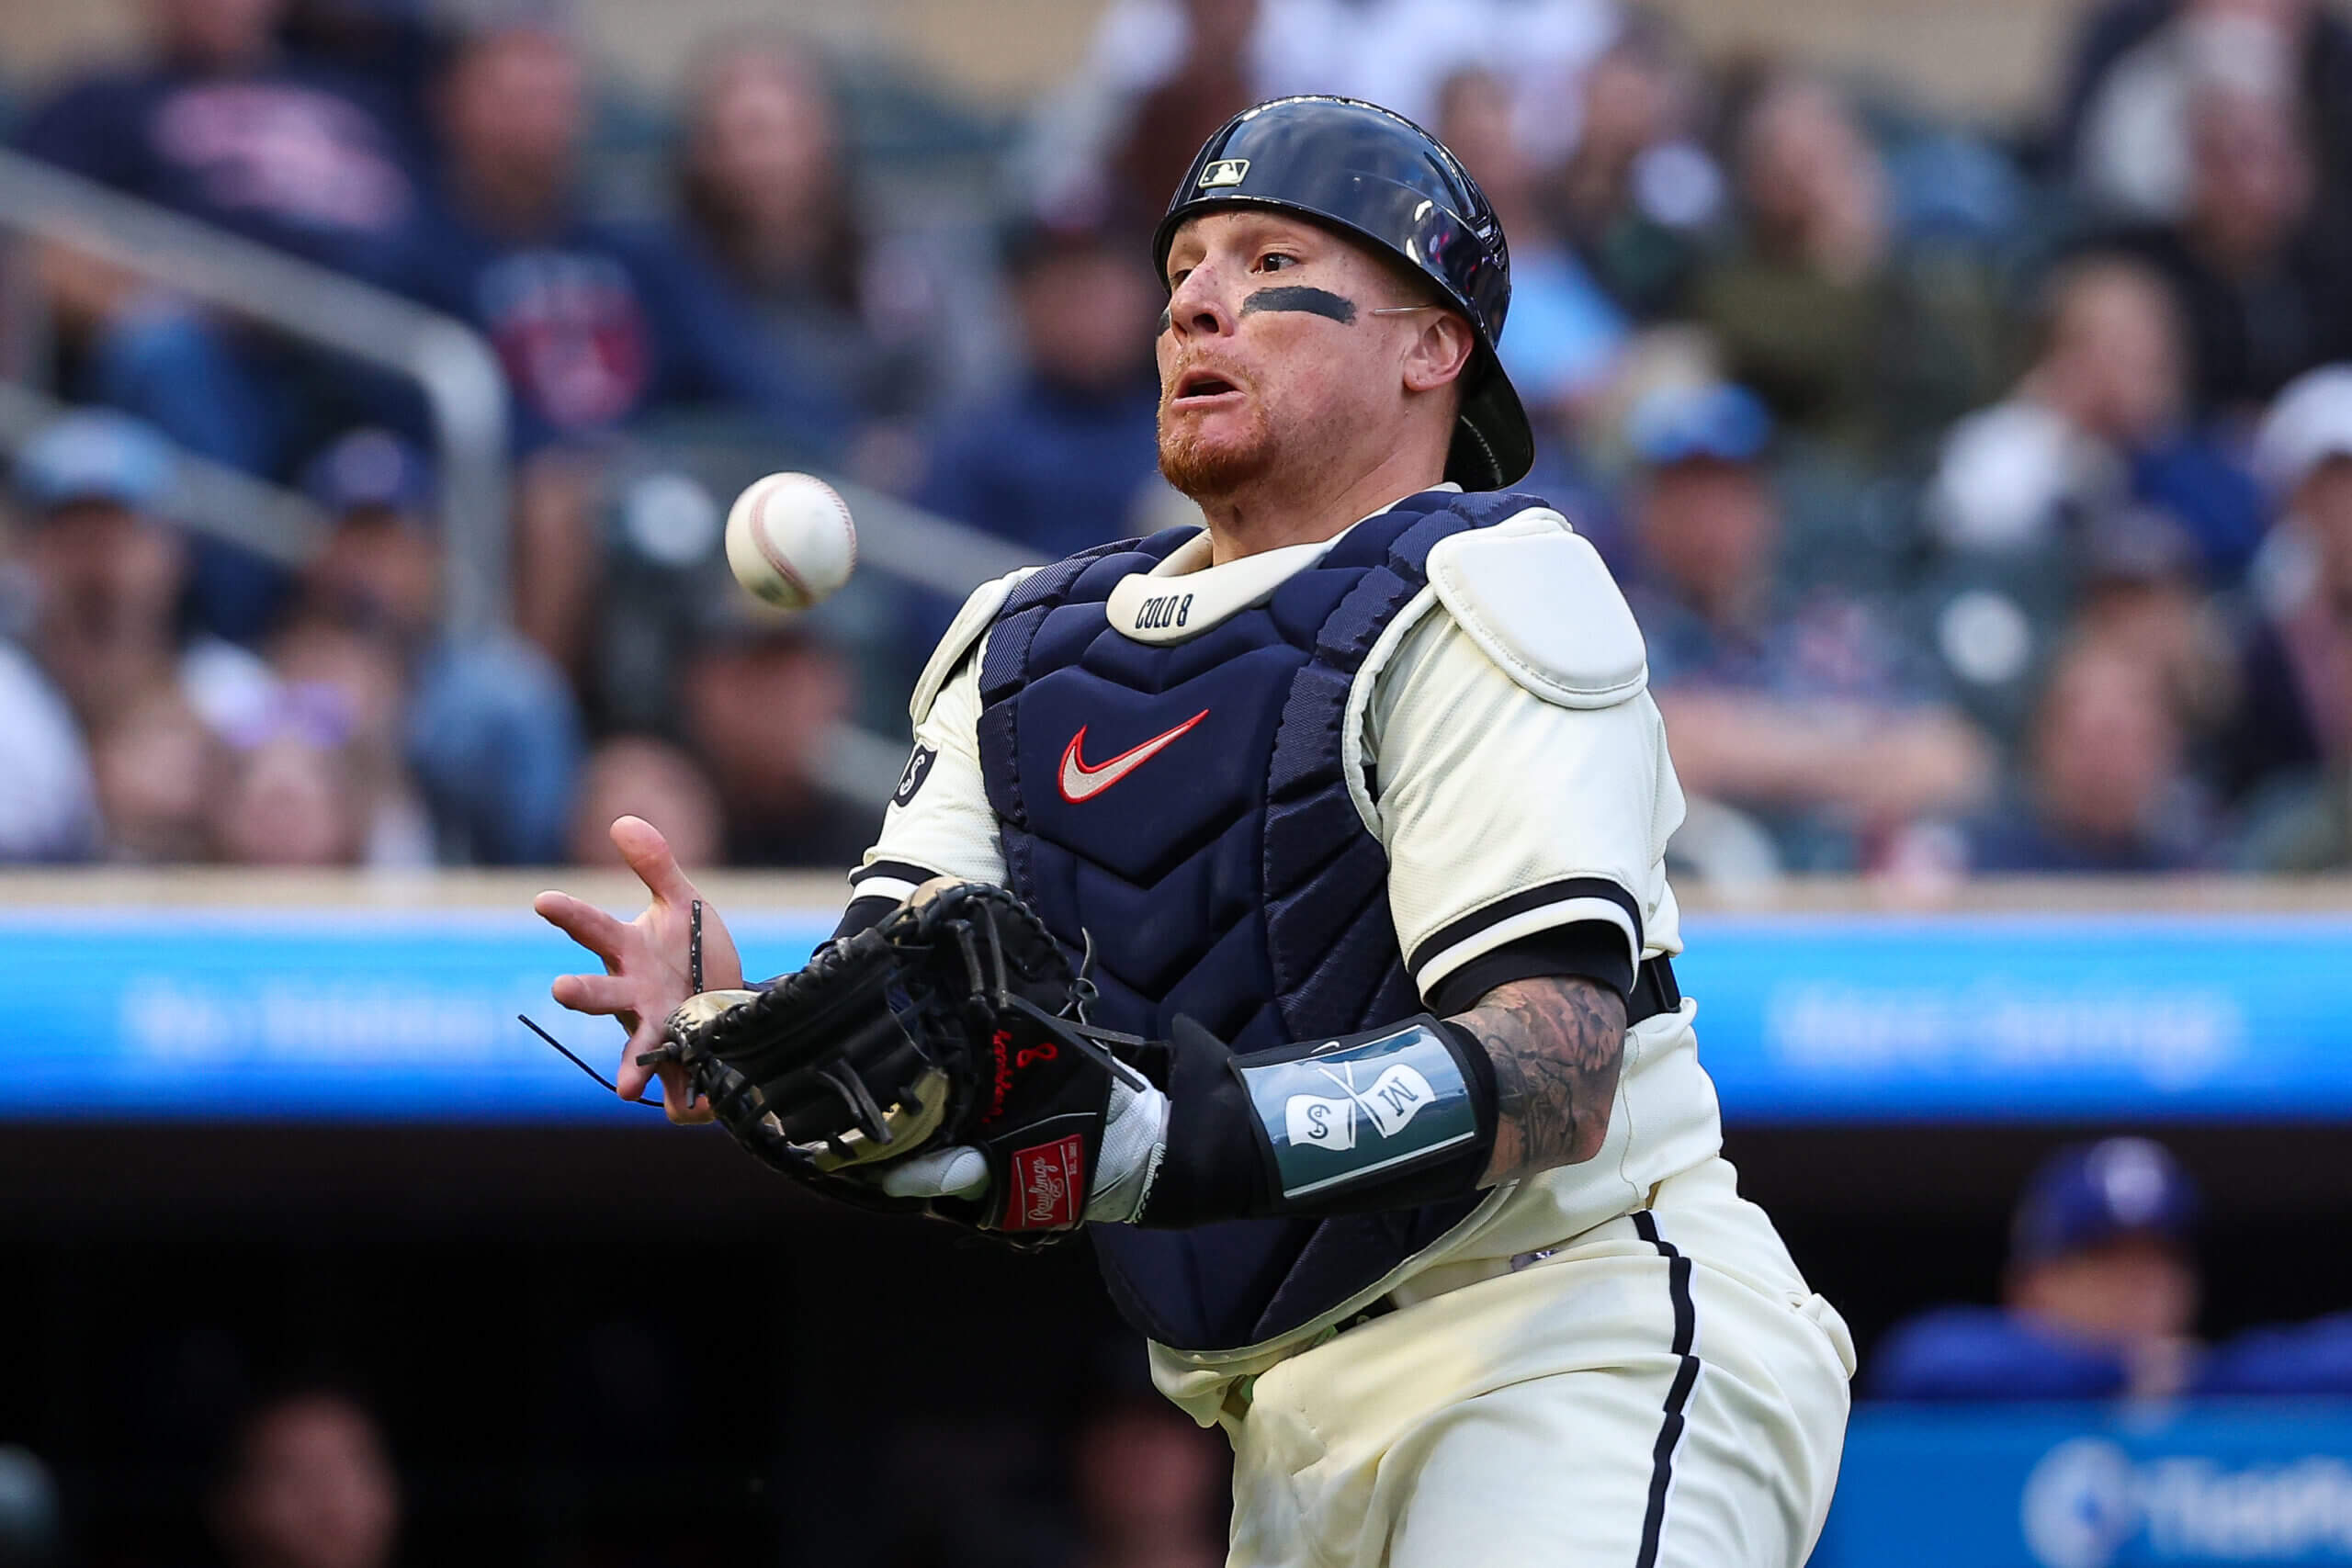 Three Twins takeaways: Christian Vázquez's slump, shrinking strikeouts and a new bullpen find